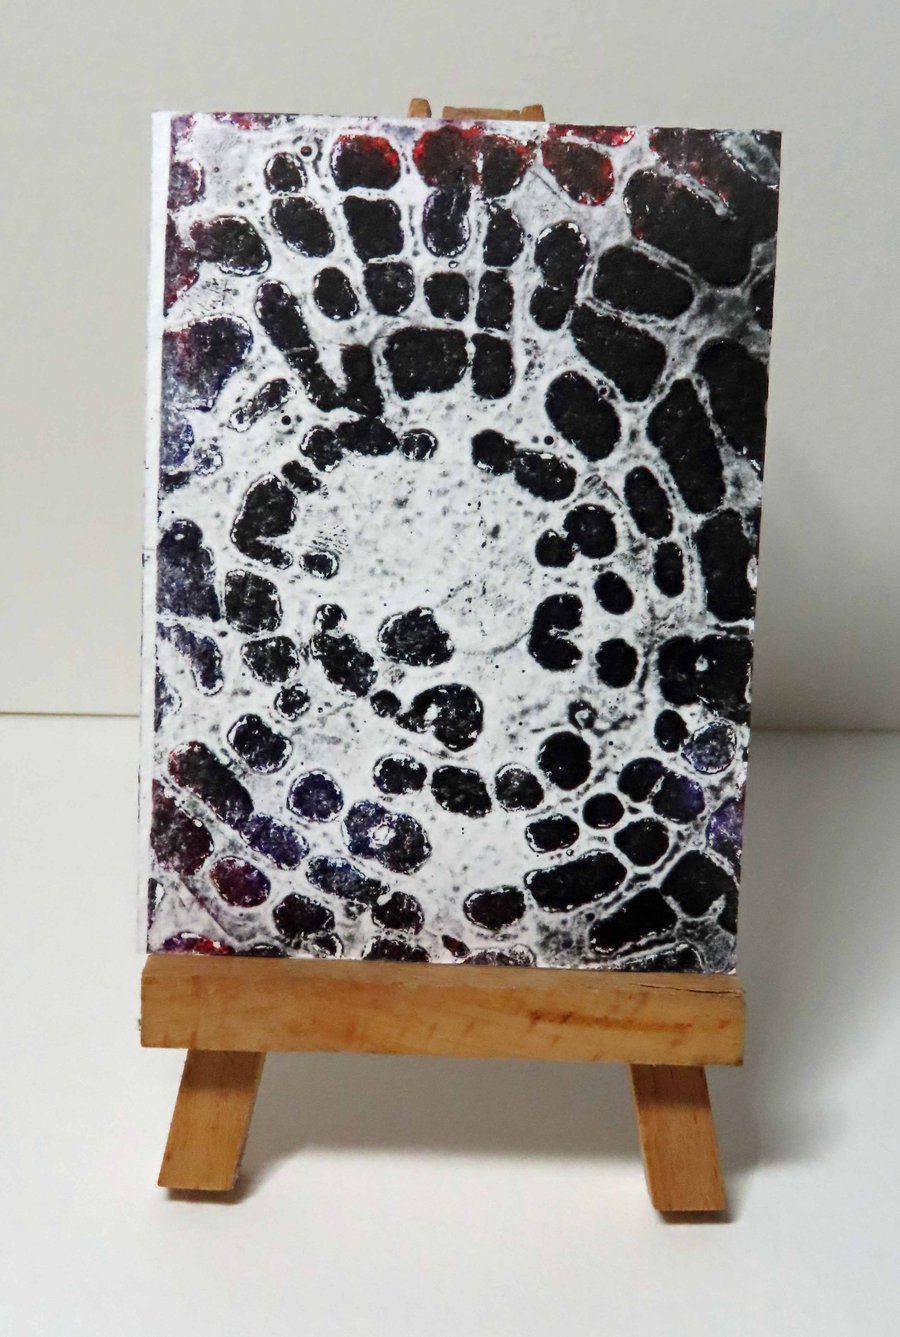 ACEO Entwine 6 Original Collagraph Print OOAK 